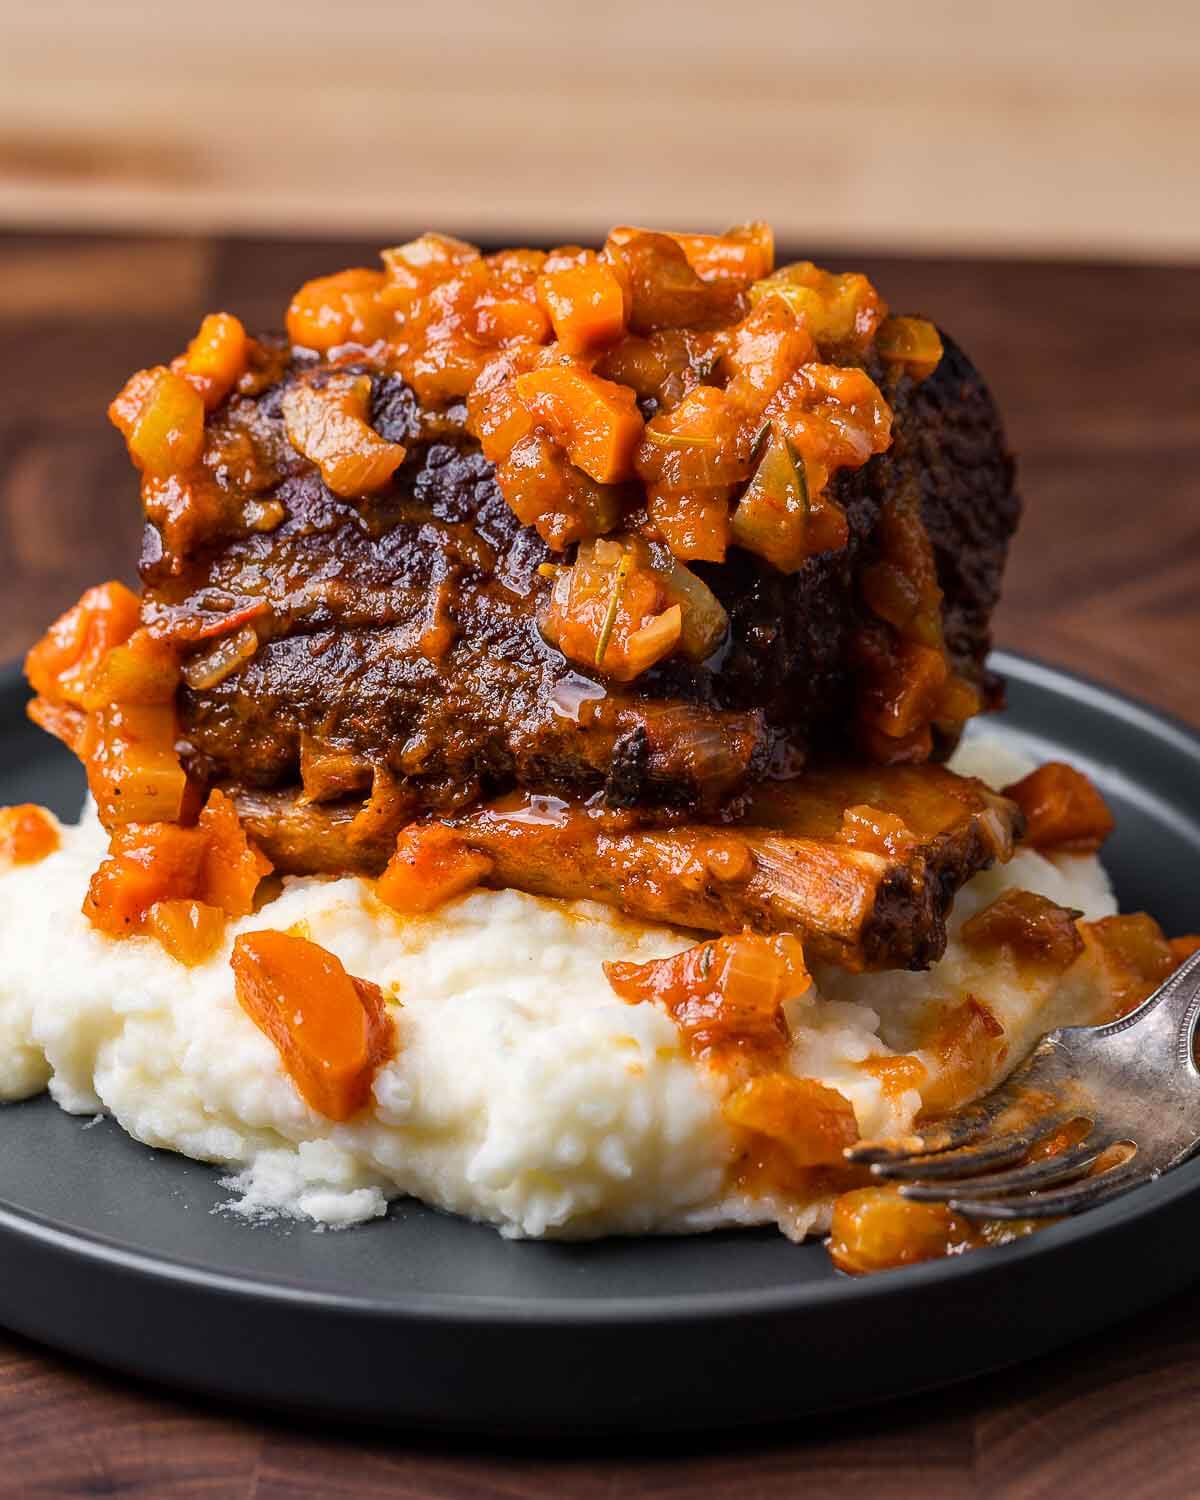 Large braised short rib on top of mashed potatoes in grey plate.